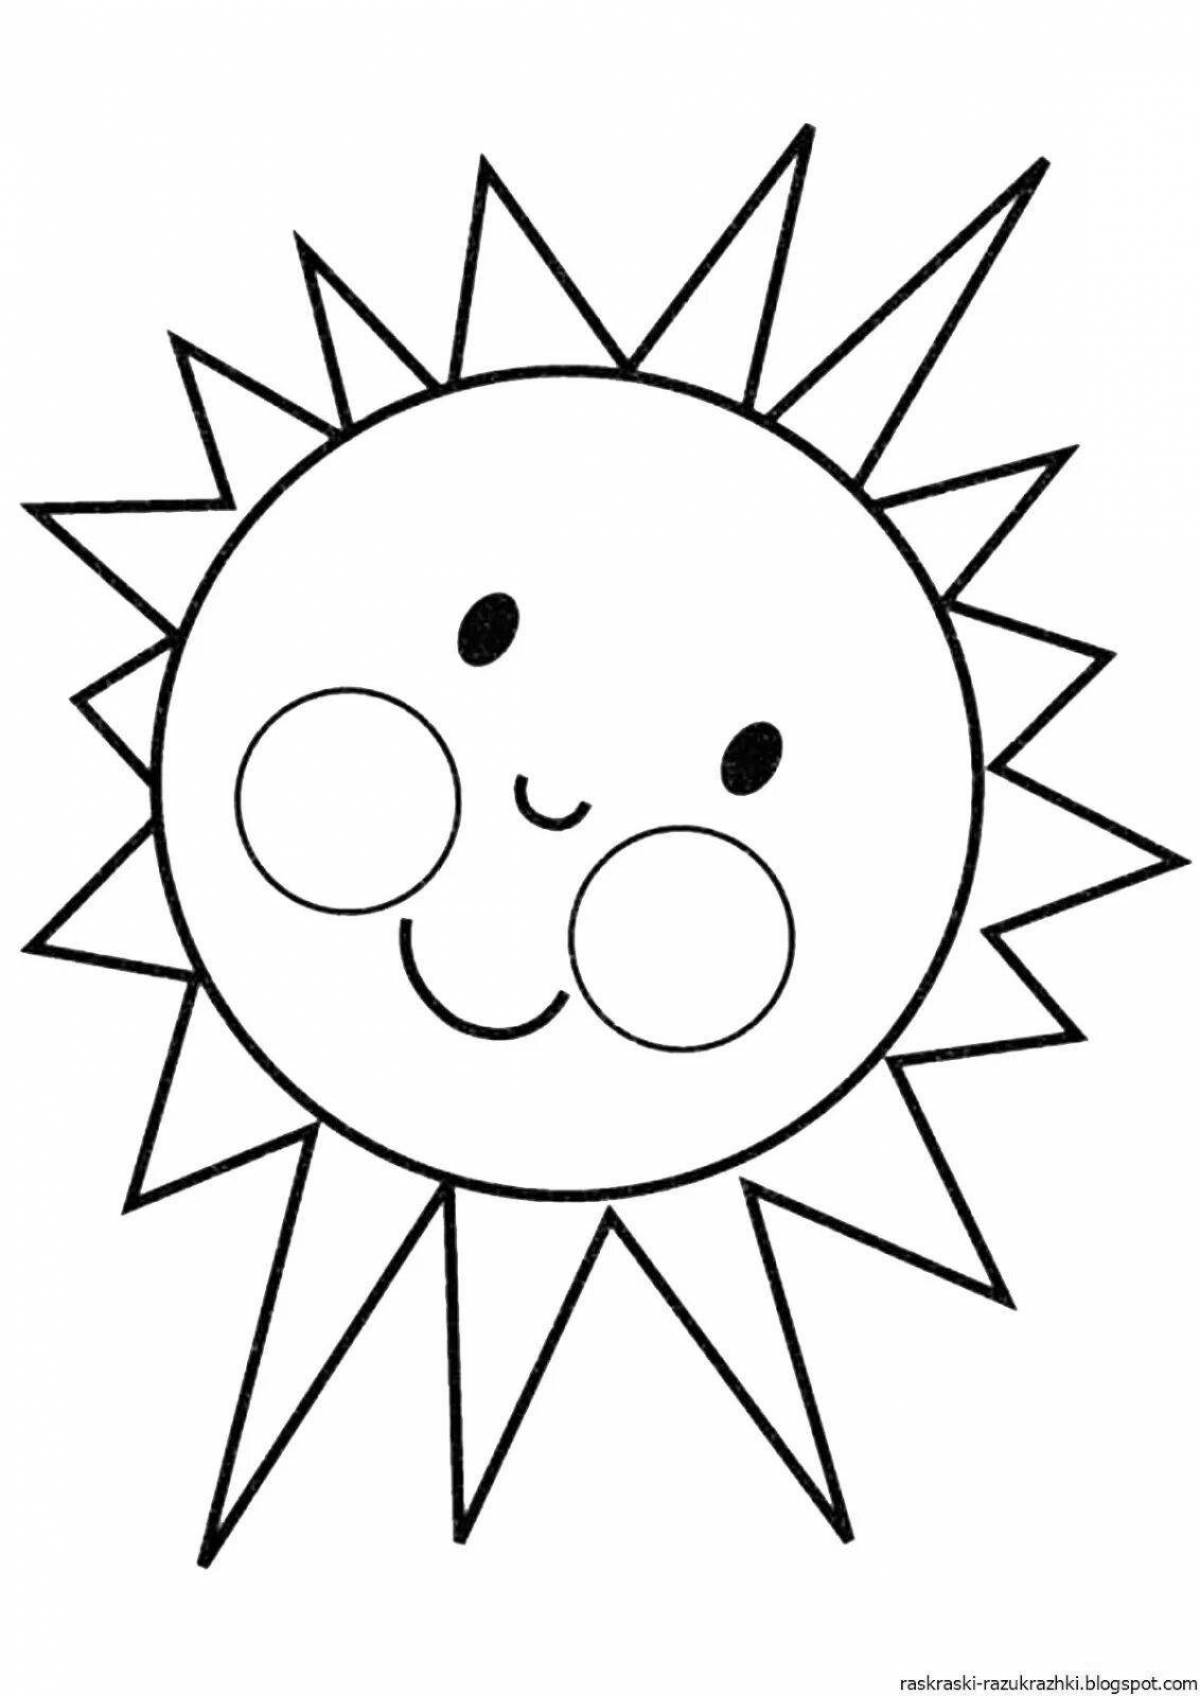 Radiant coloring page solar figure